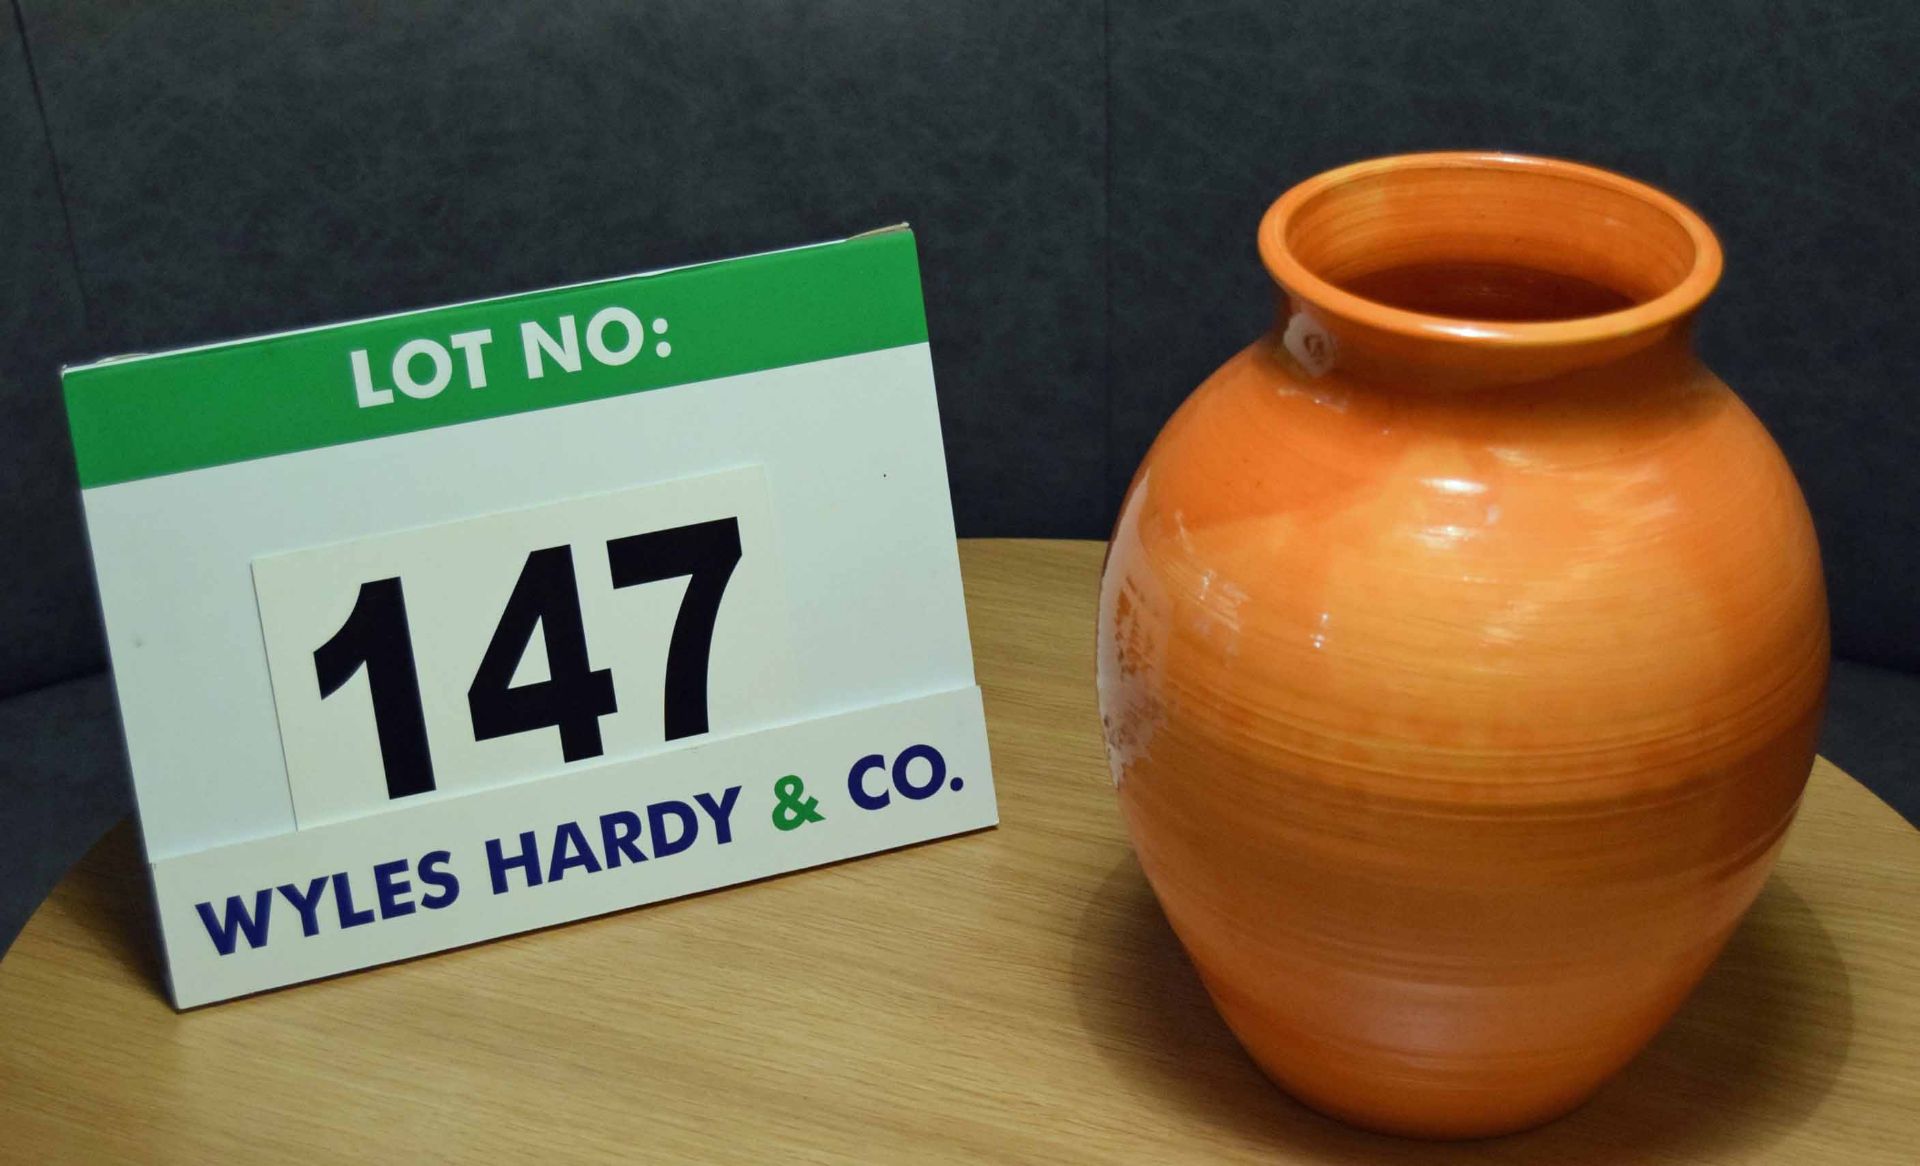 An Orange Glazed Pottery Vase bearing a Potters Mark 'KN' on the Base, 255mm tall x 210mm at